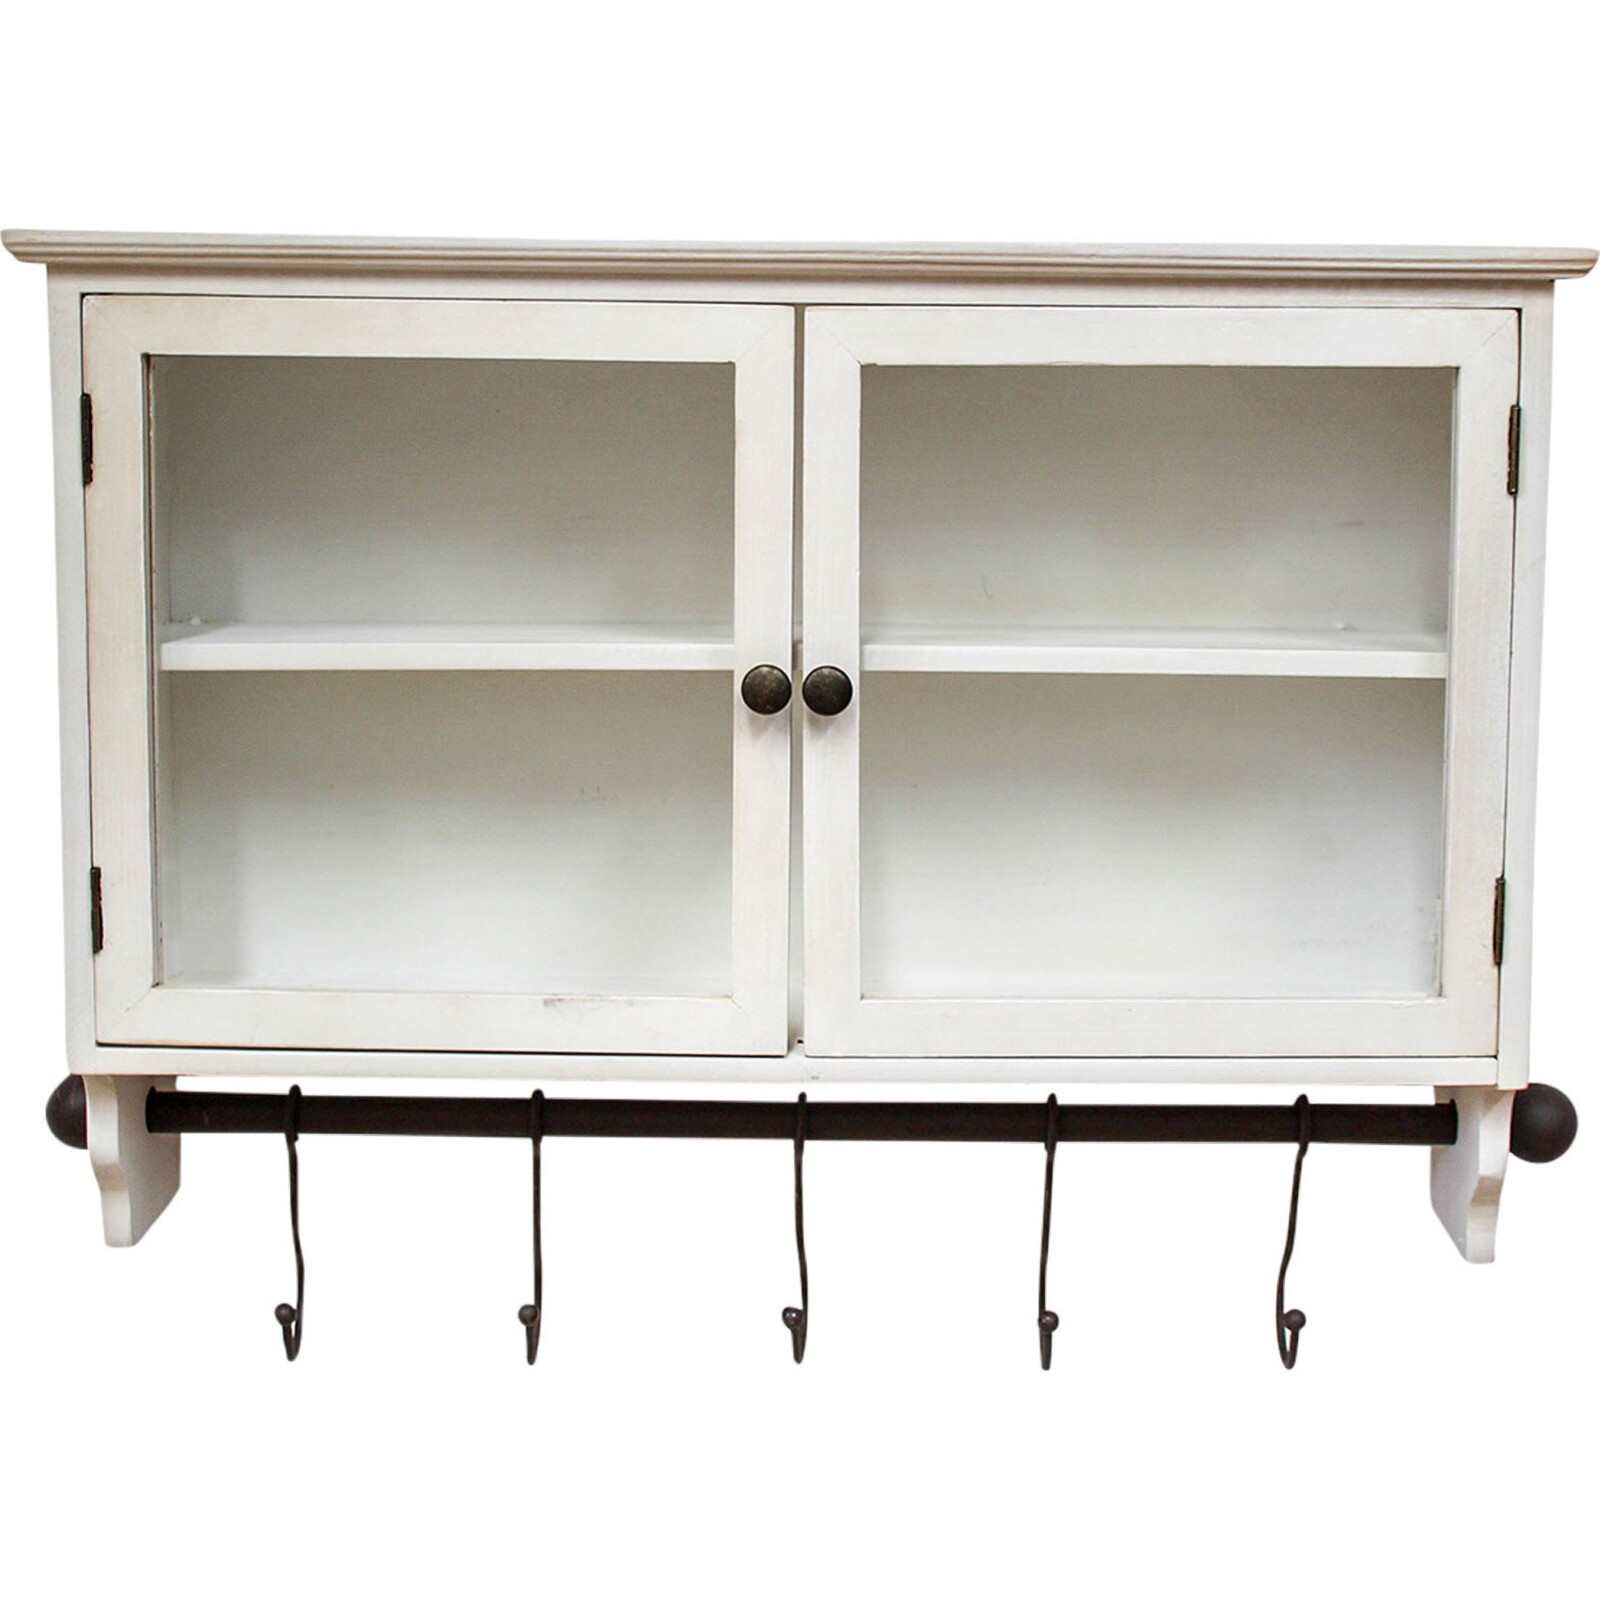 Wall cabinet with Hooks